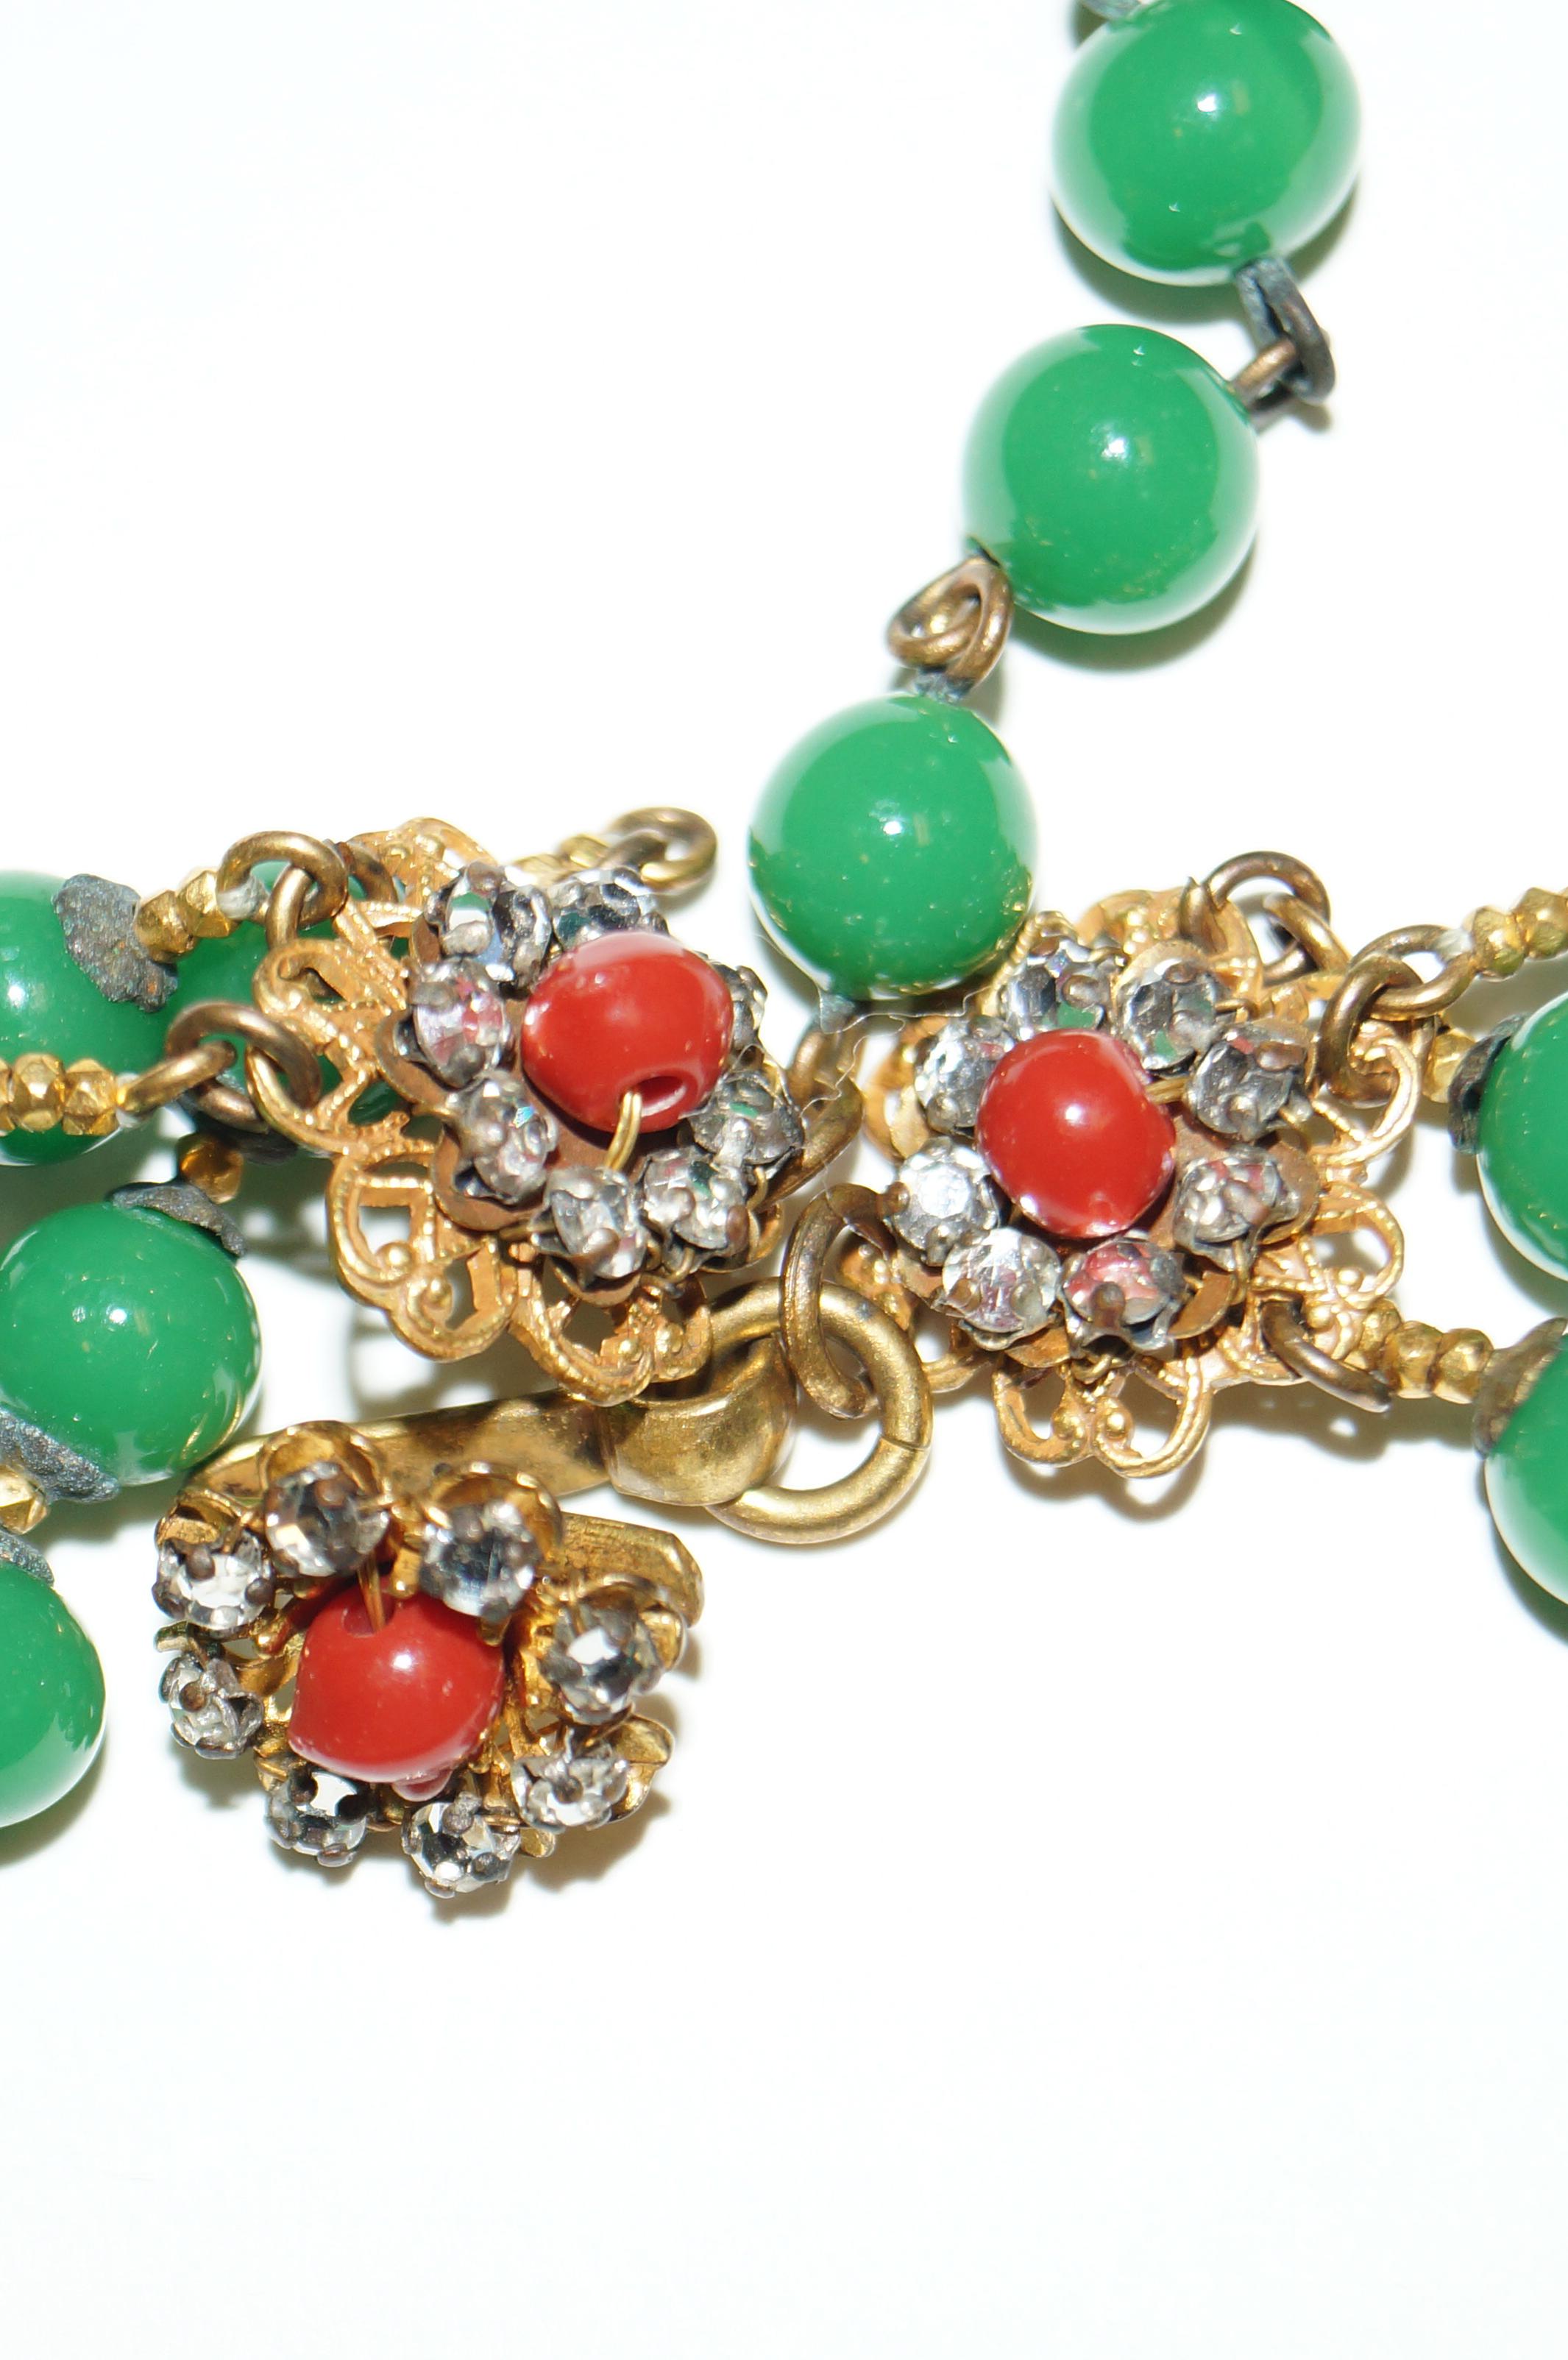 1950s Miriam Haskell Green and Umber Glass and Rhinestone Floral Choker 3